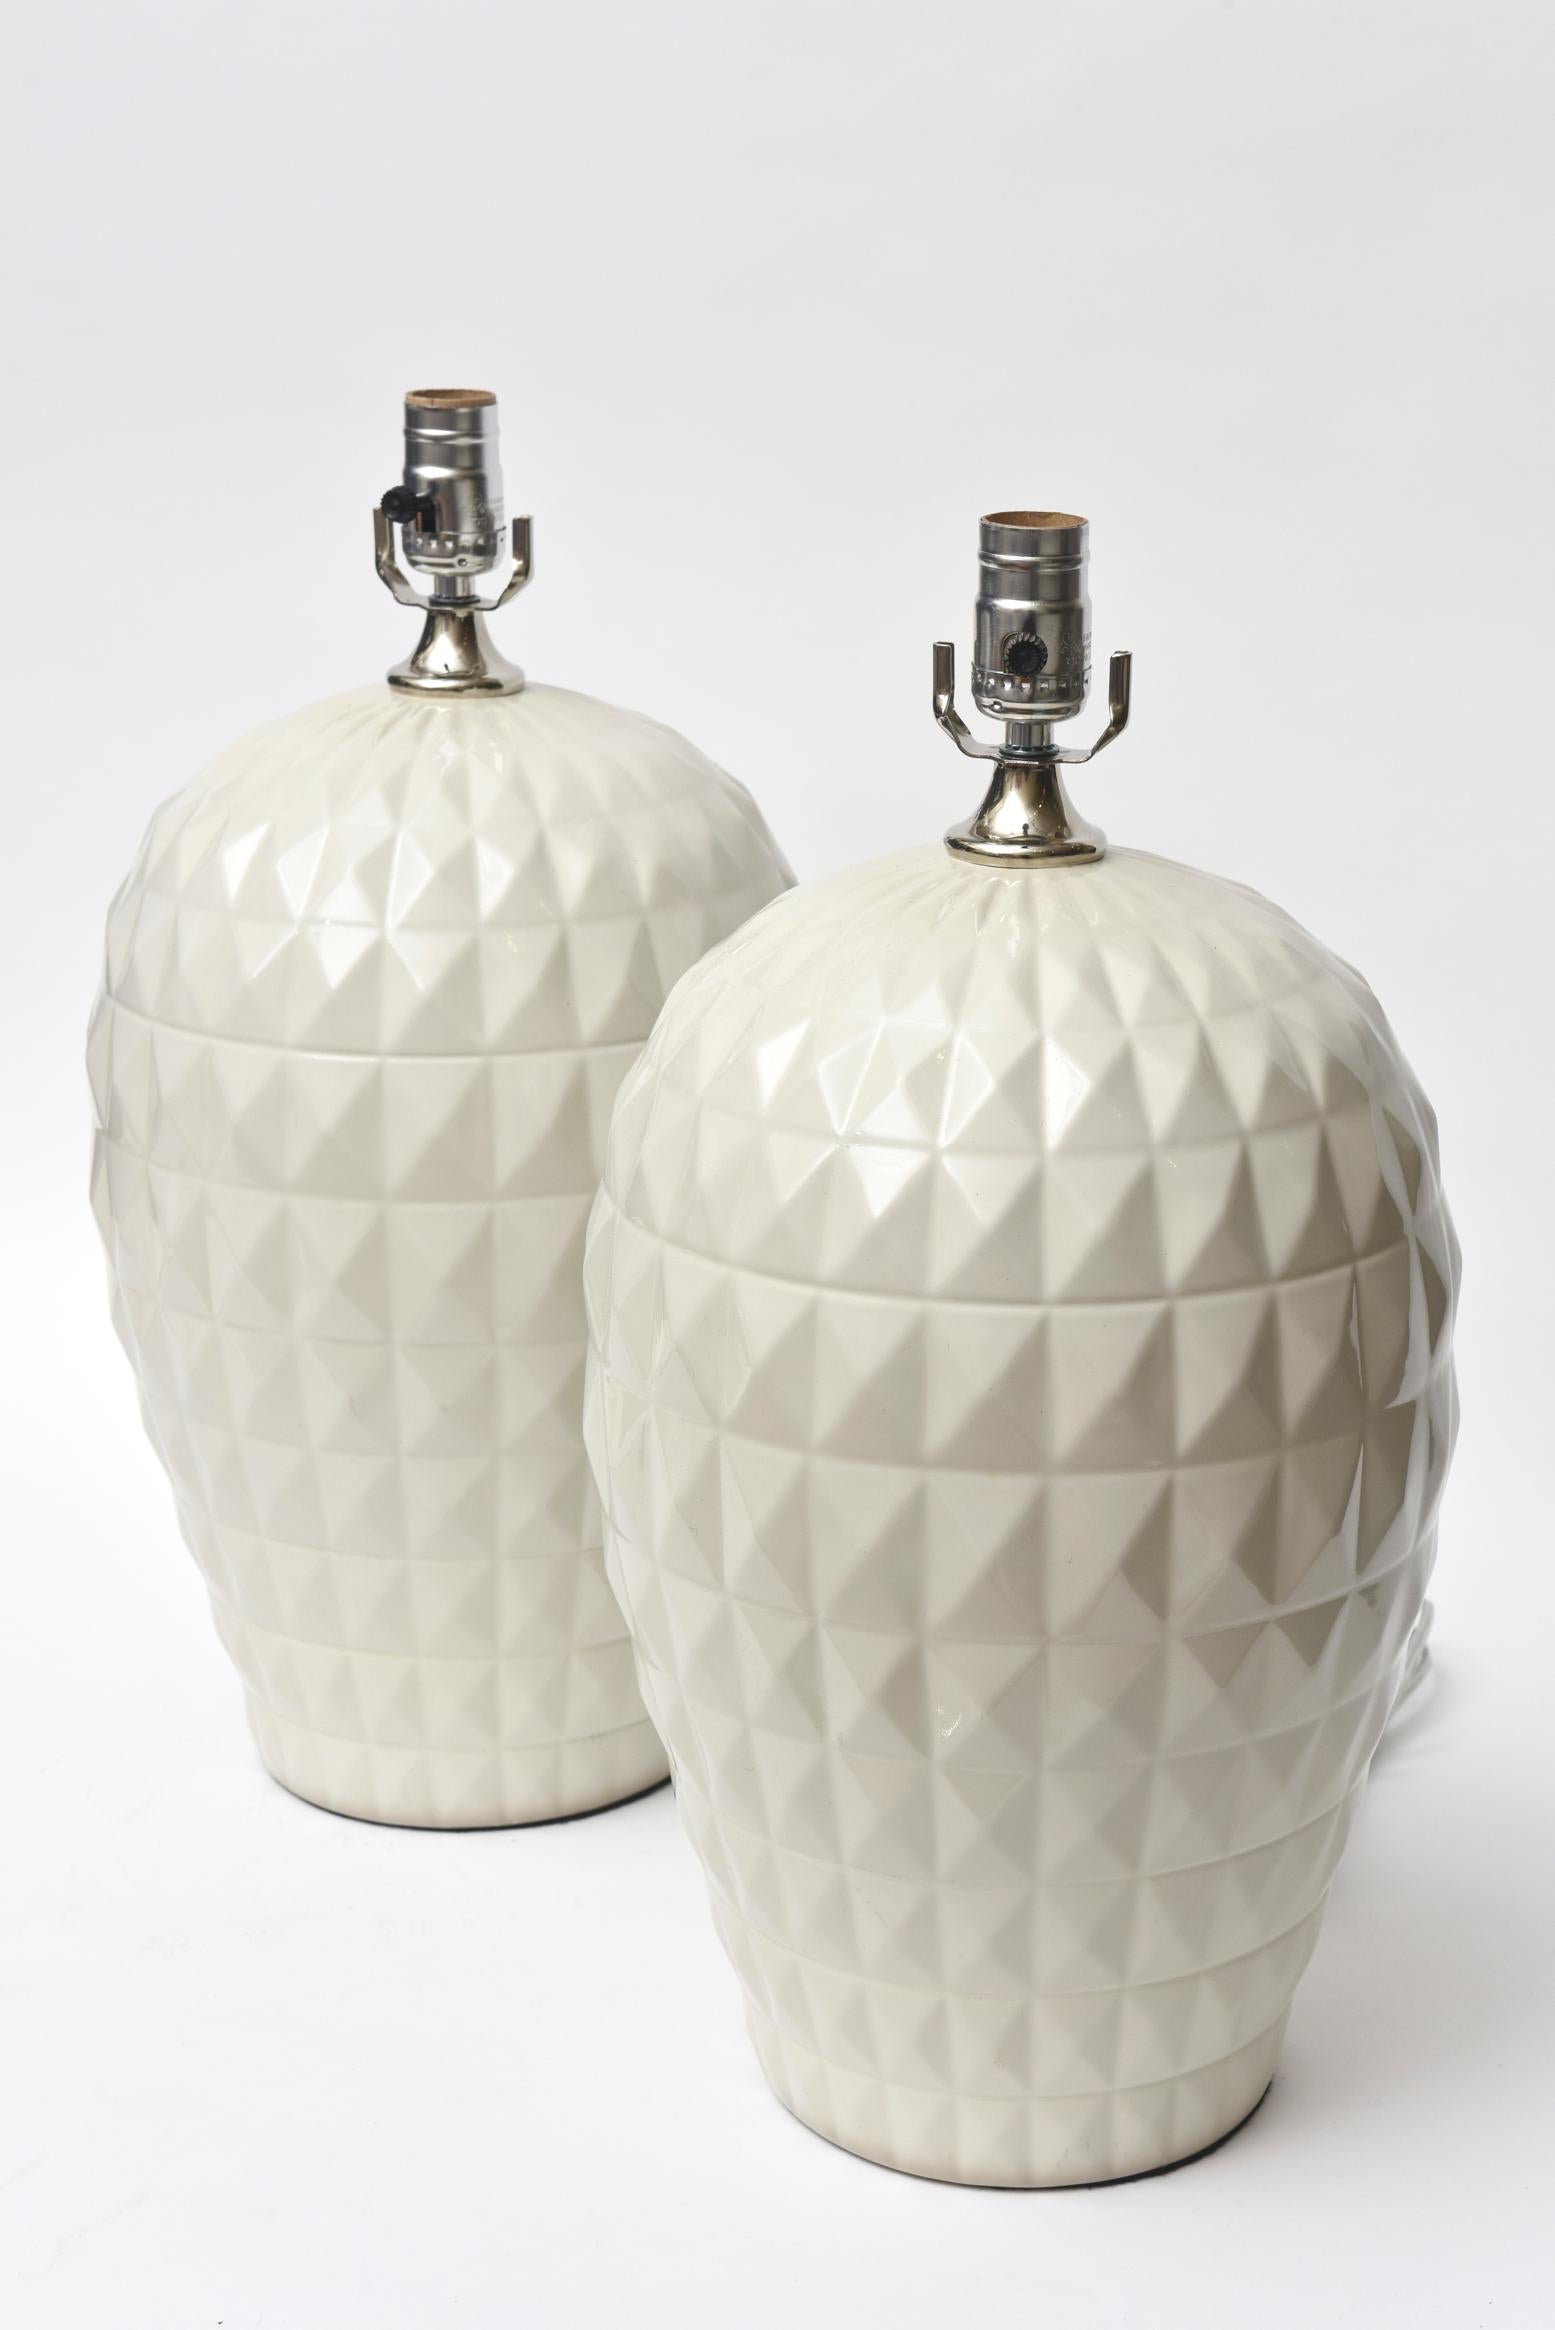 These amazing pair of vintage Italian 1960s ceramic lamps are textural glazed forms of geometric diamond shaped forms. They are dimensional. They are off-white glazed and have been newly rewired and cleaned. They do not have shades nor harps. The